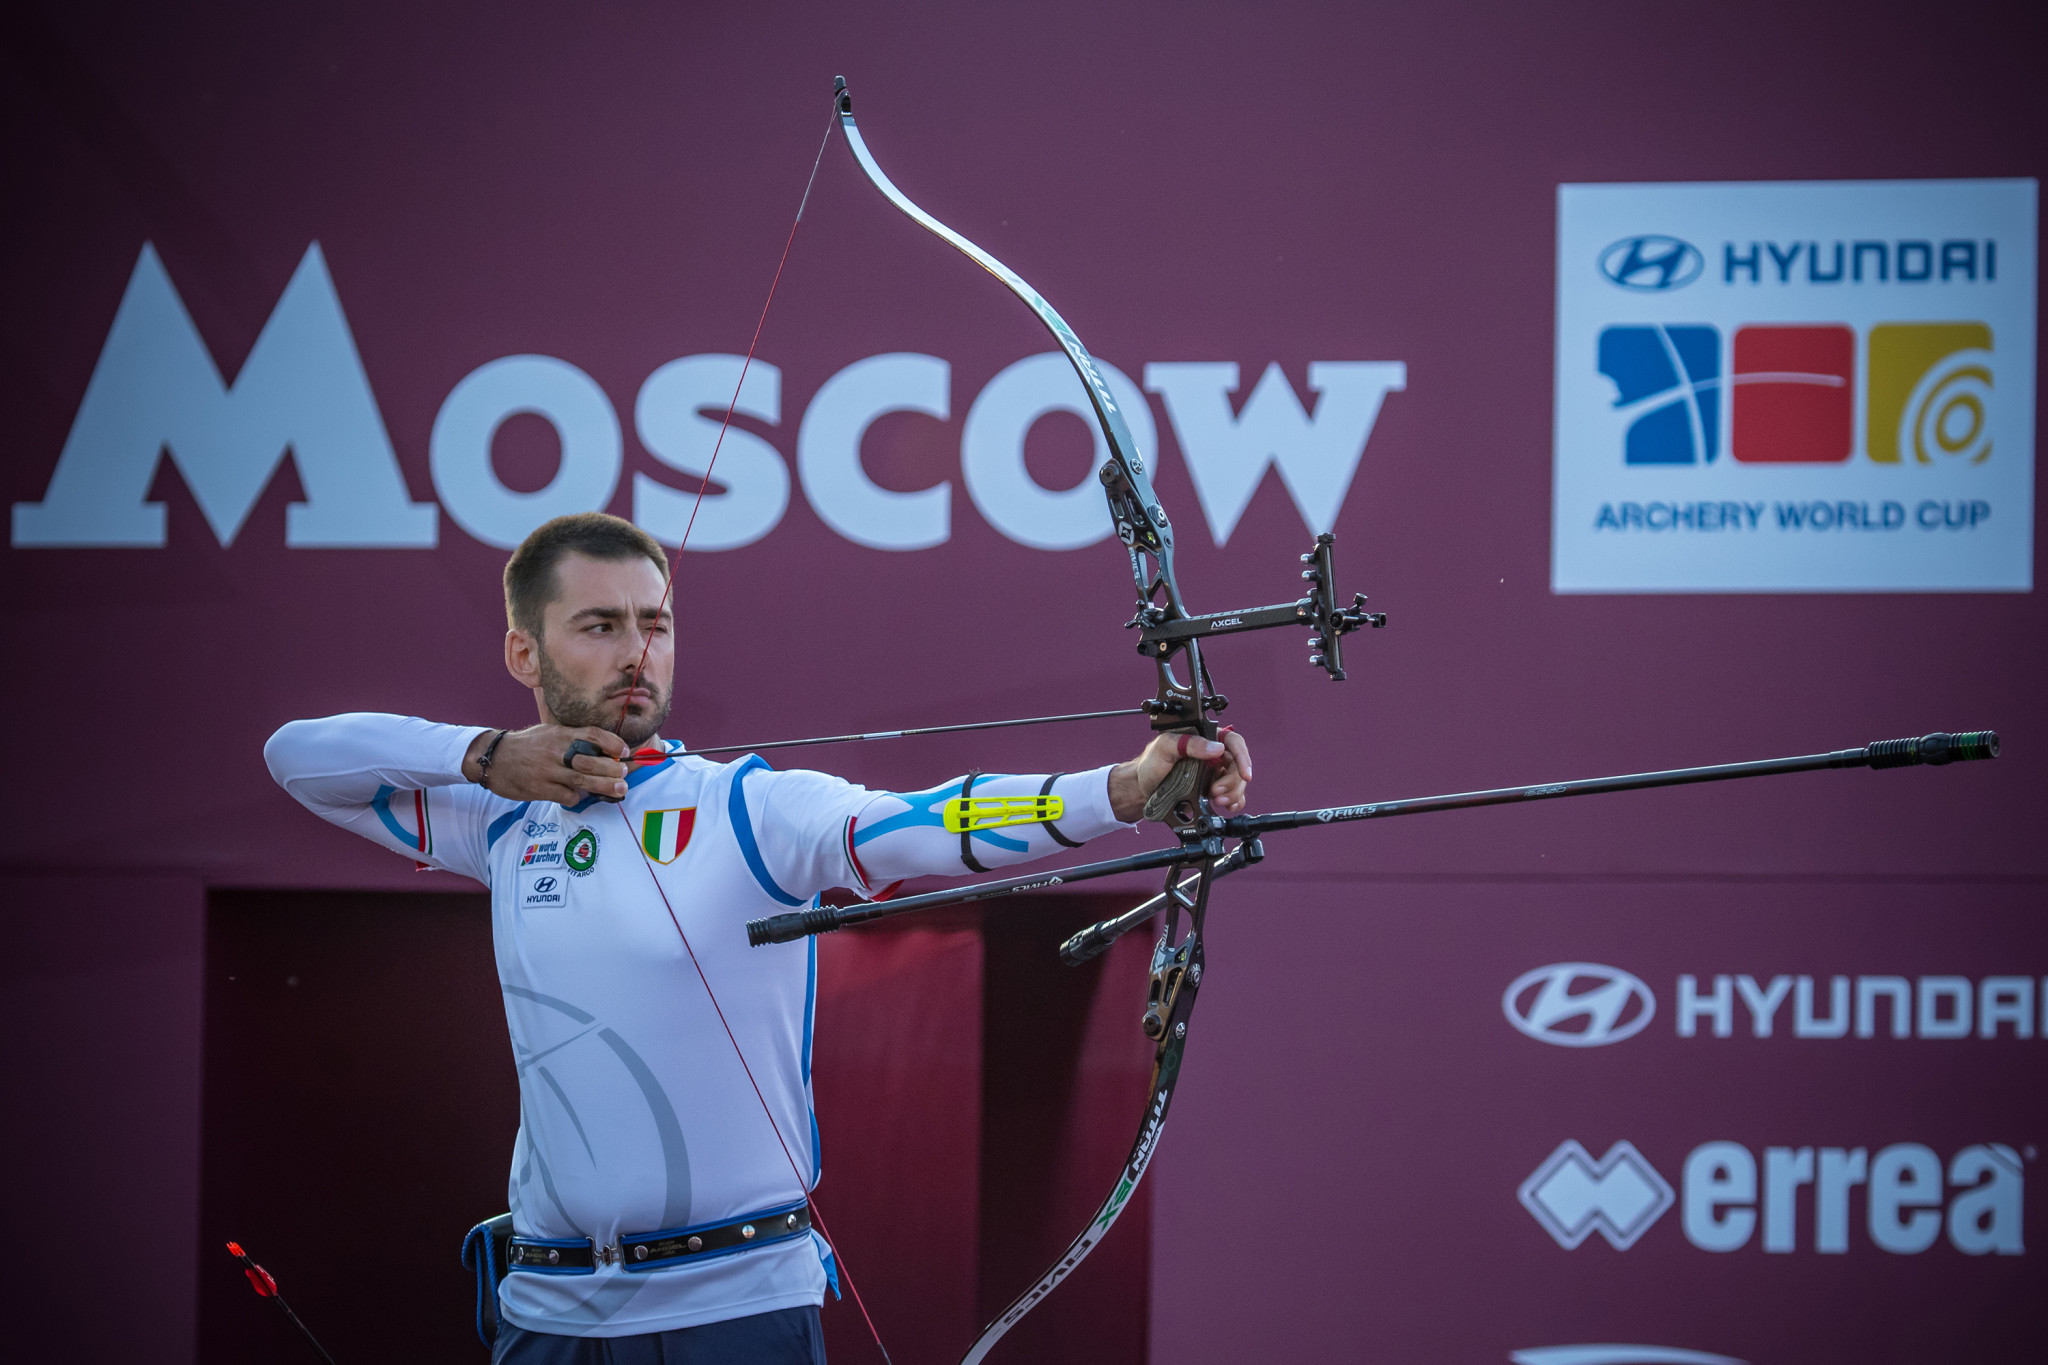 World Archery to reduce flights after joining UN Sports for Climate Action Framework